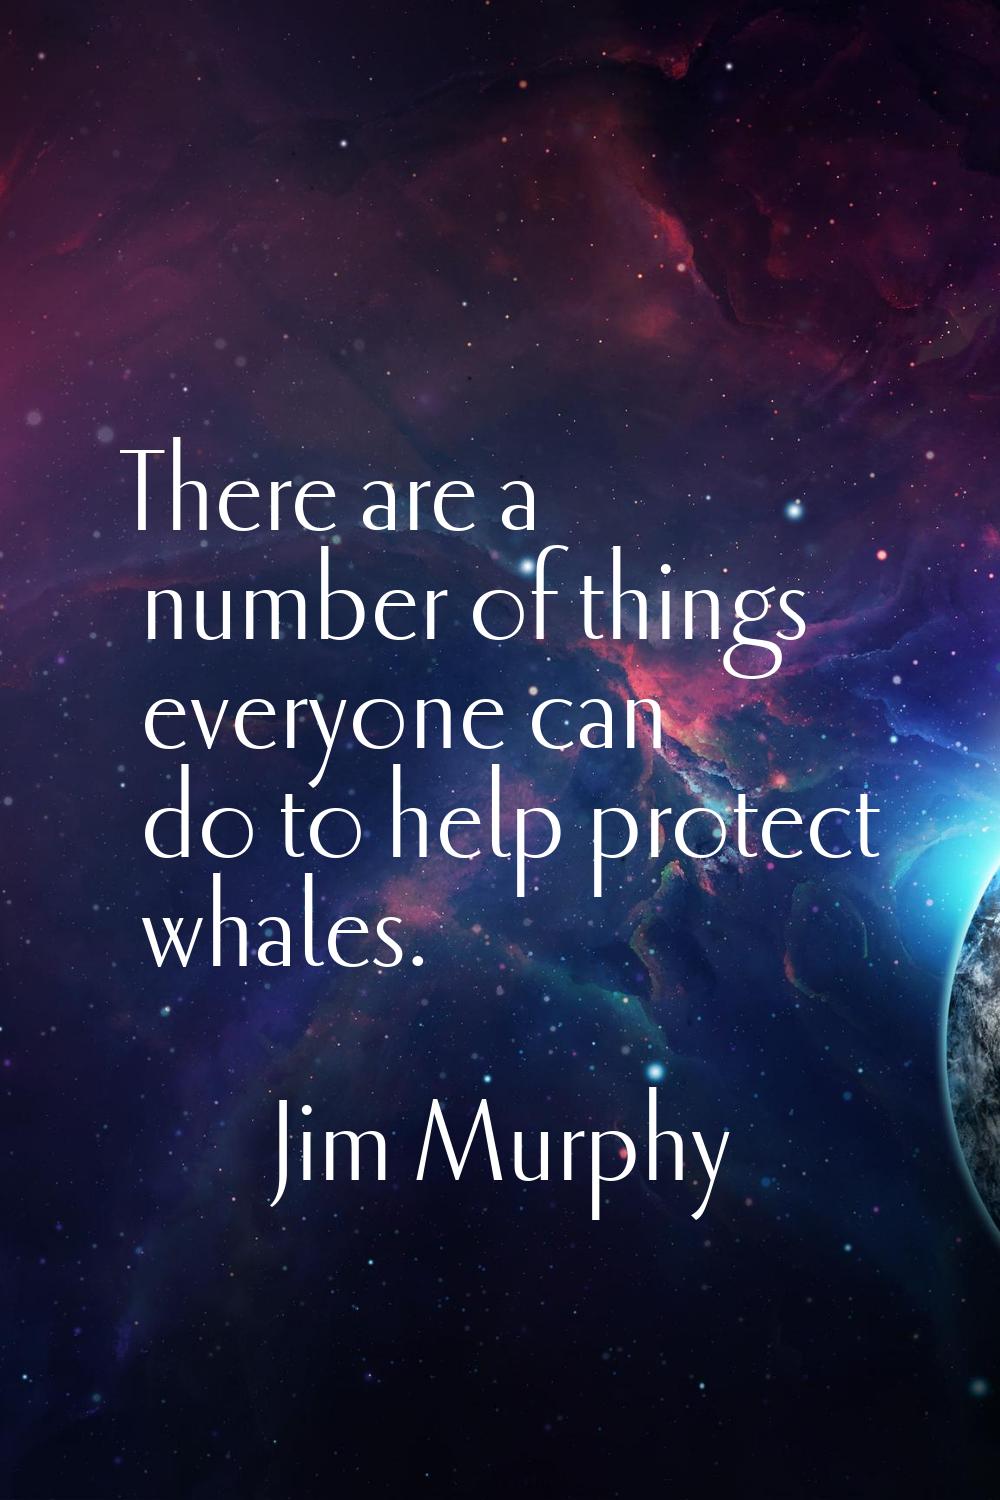 There are a number of things everyone can do to help protect whales.